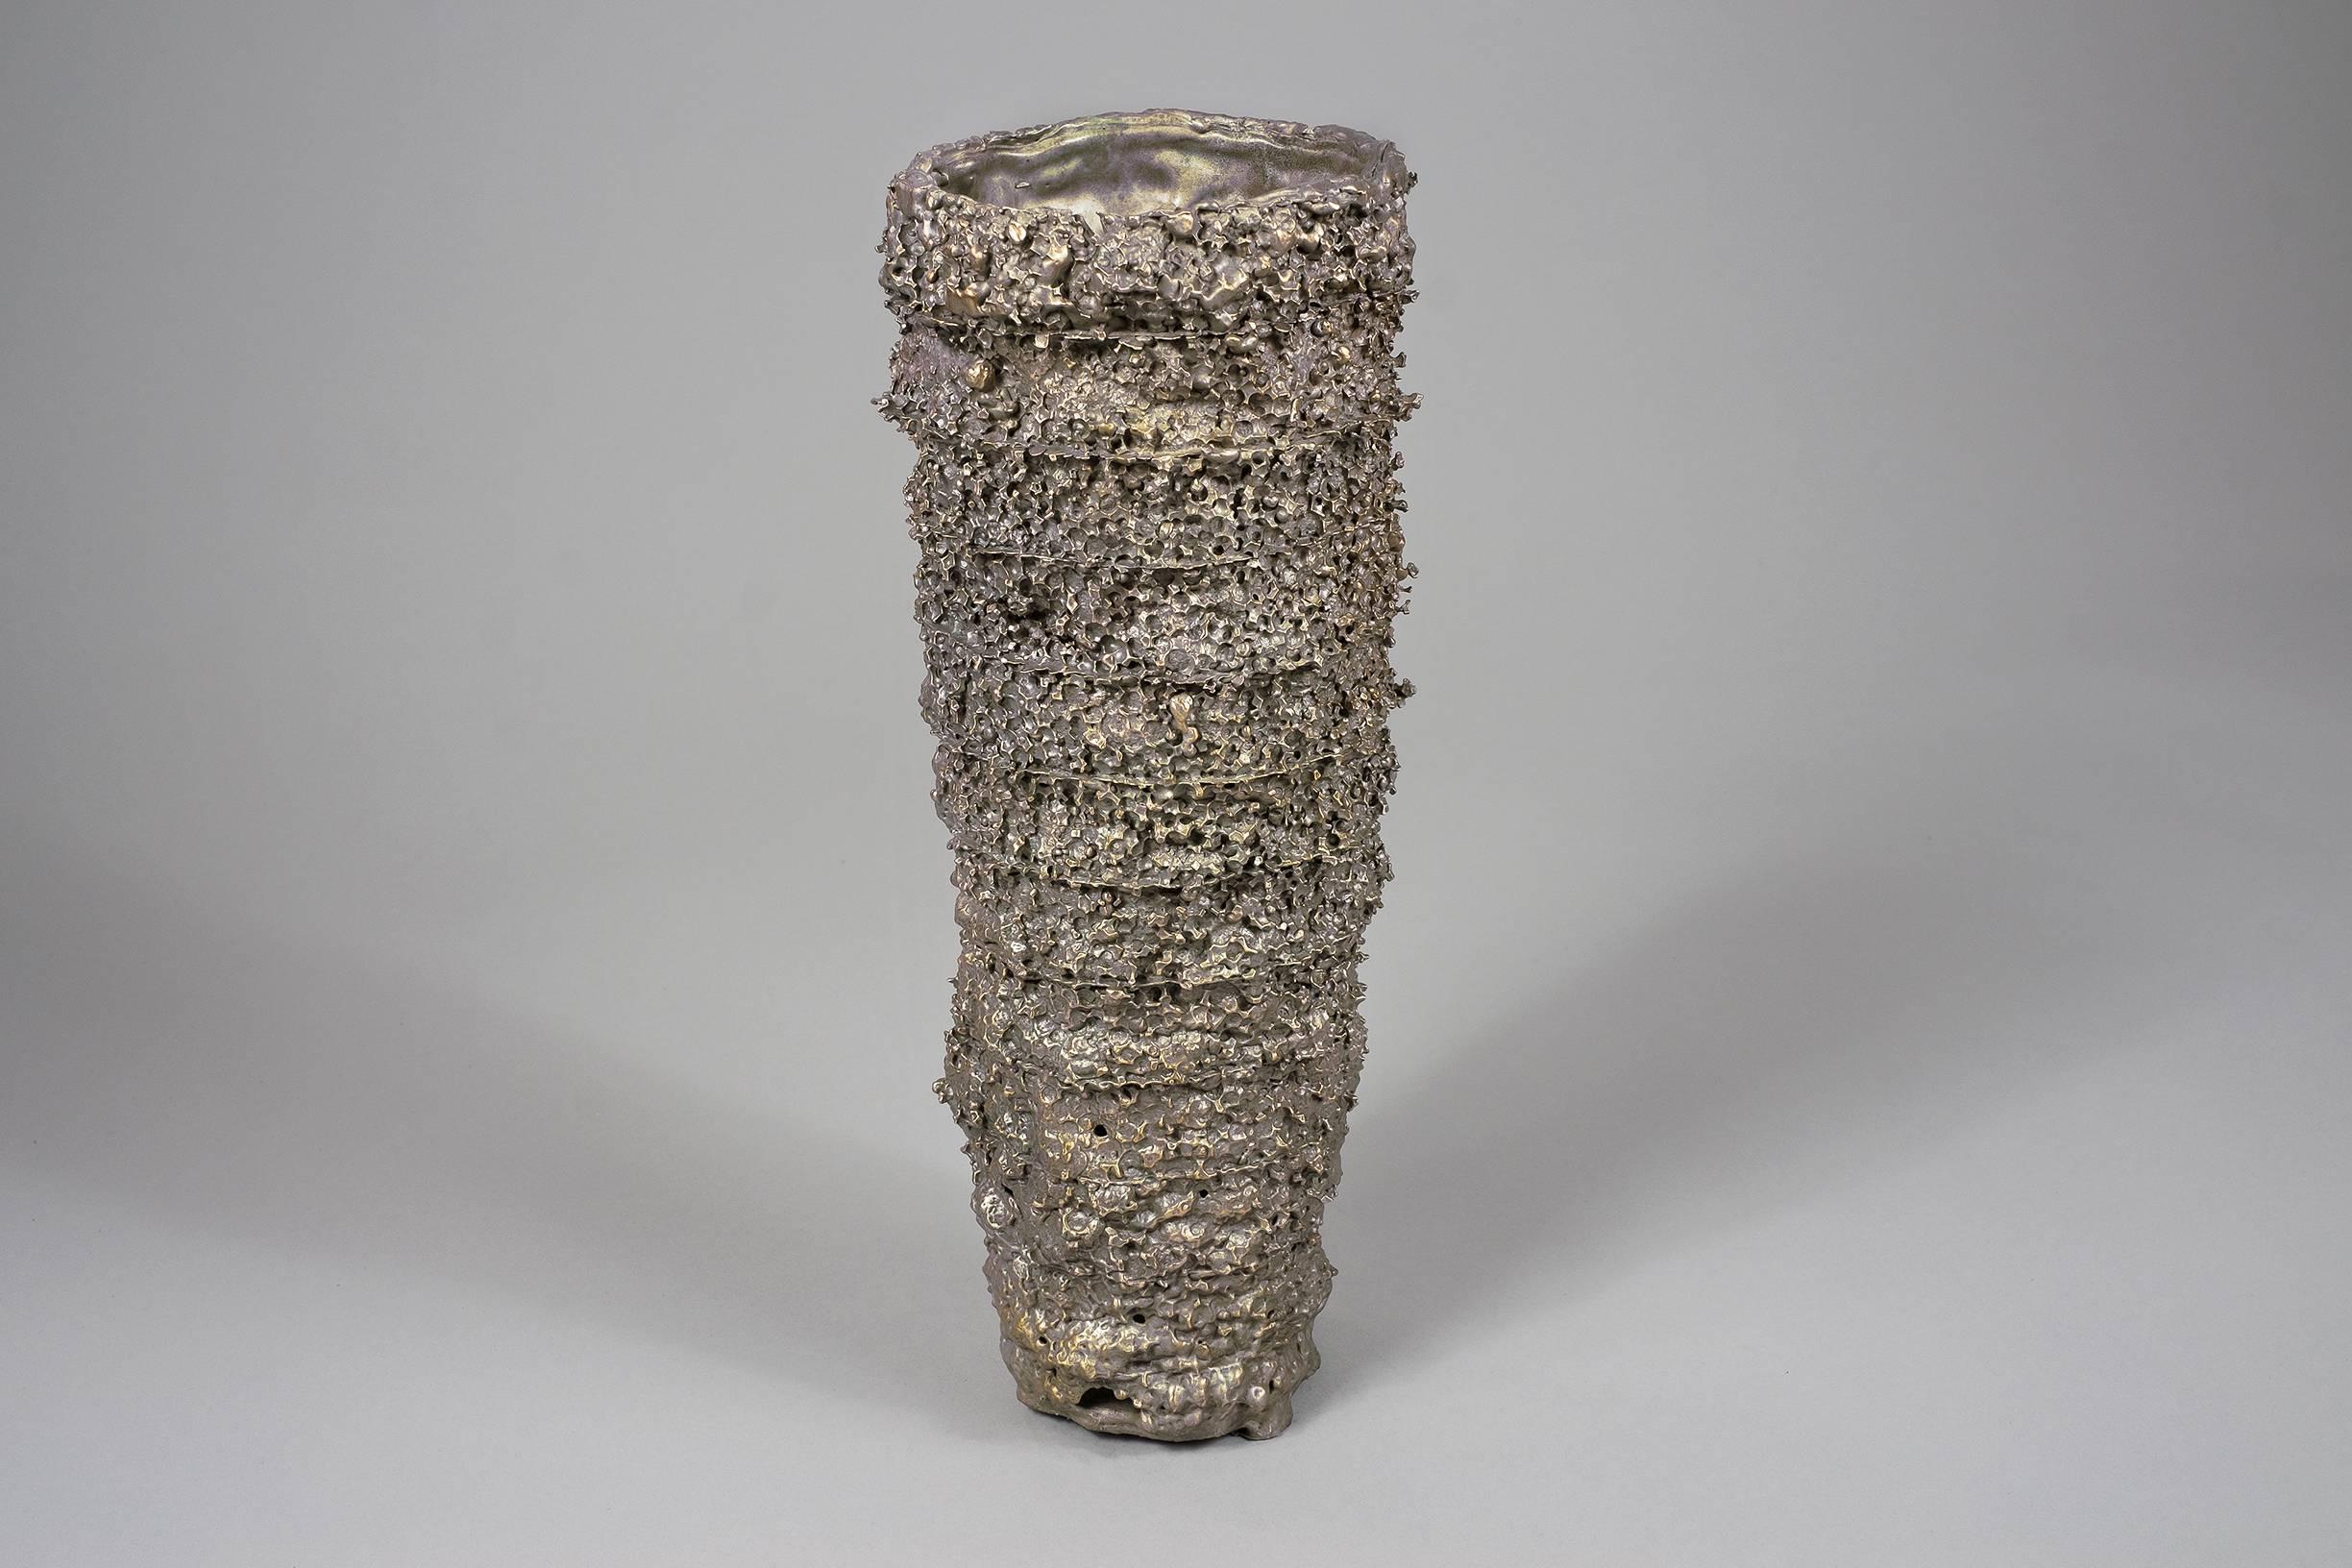 Part of a pioneering and significant new series, Fragments are a series of vessels and usable objects made using artist Kris Lamba's 'Acid Cast' technique. Whilst a large degree of control is excised over the form of the vessel, the final resulting